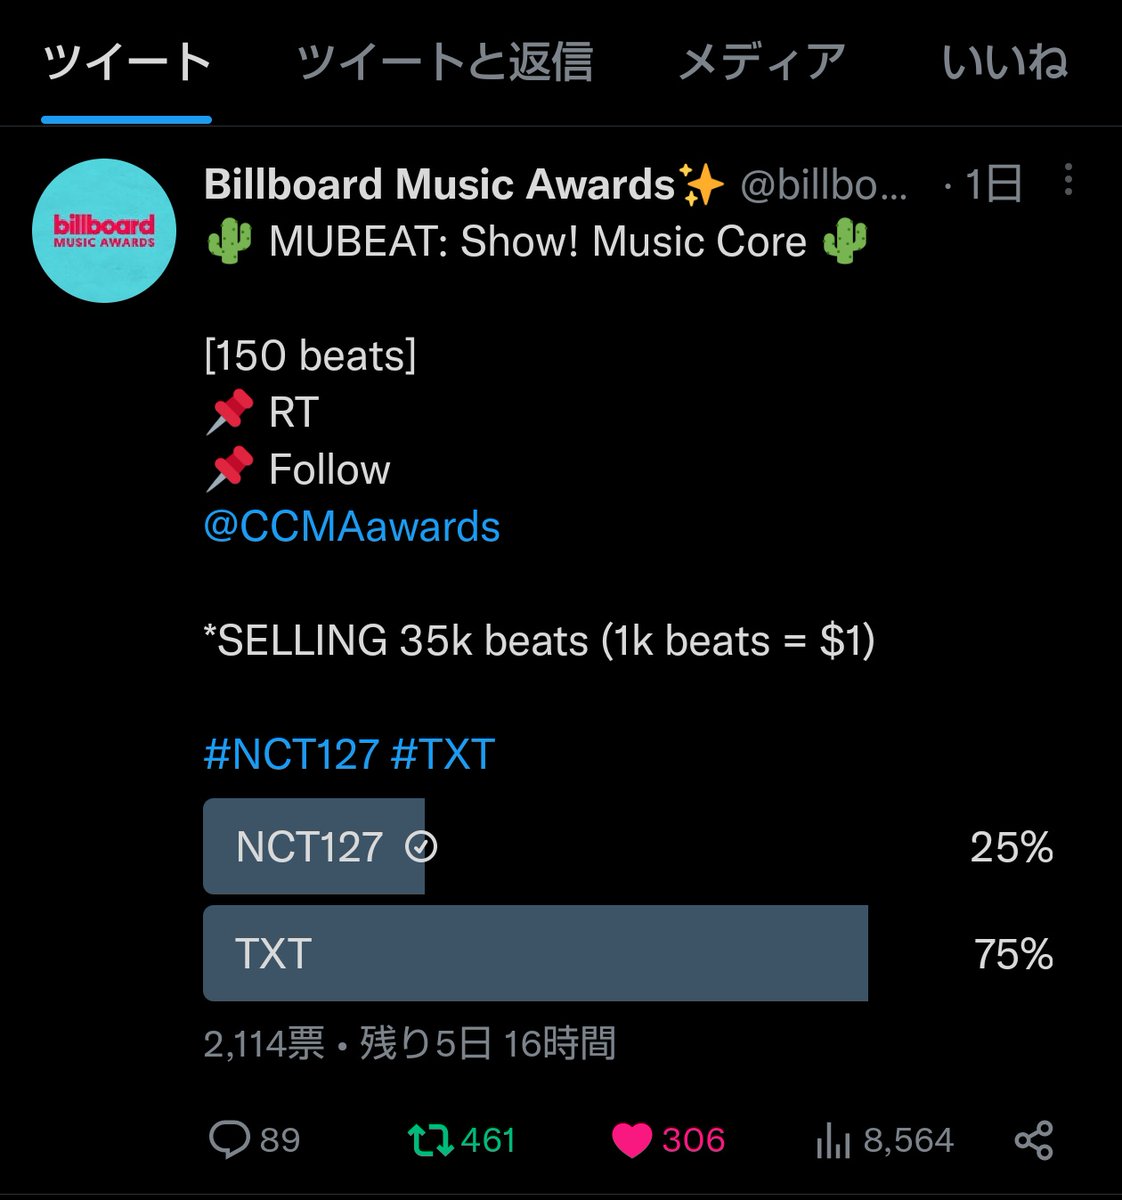 @billboard_BBMAs @CCMAawards Done for #NCT127